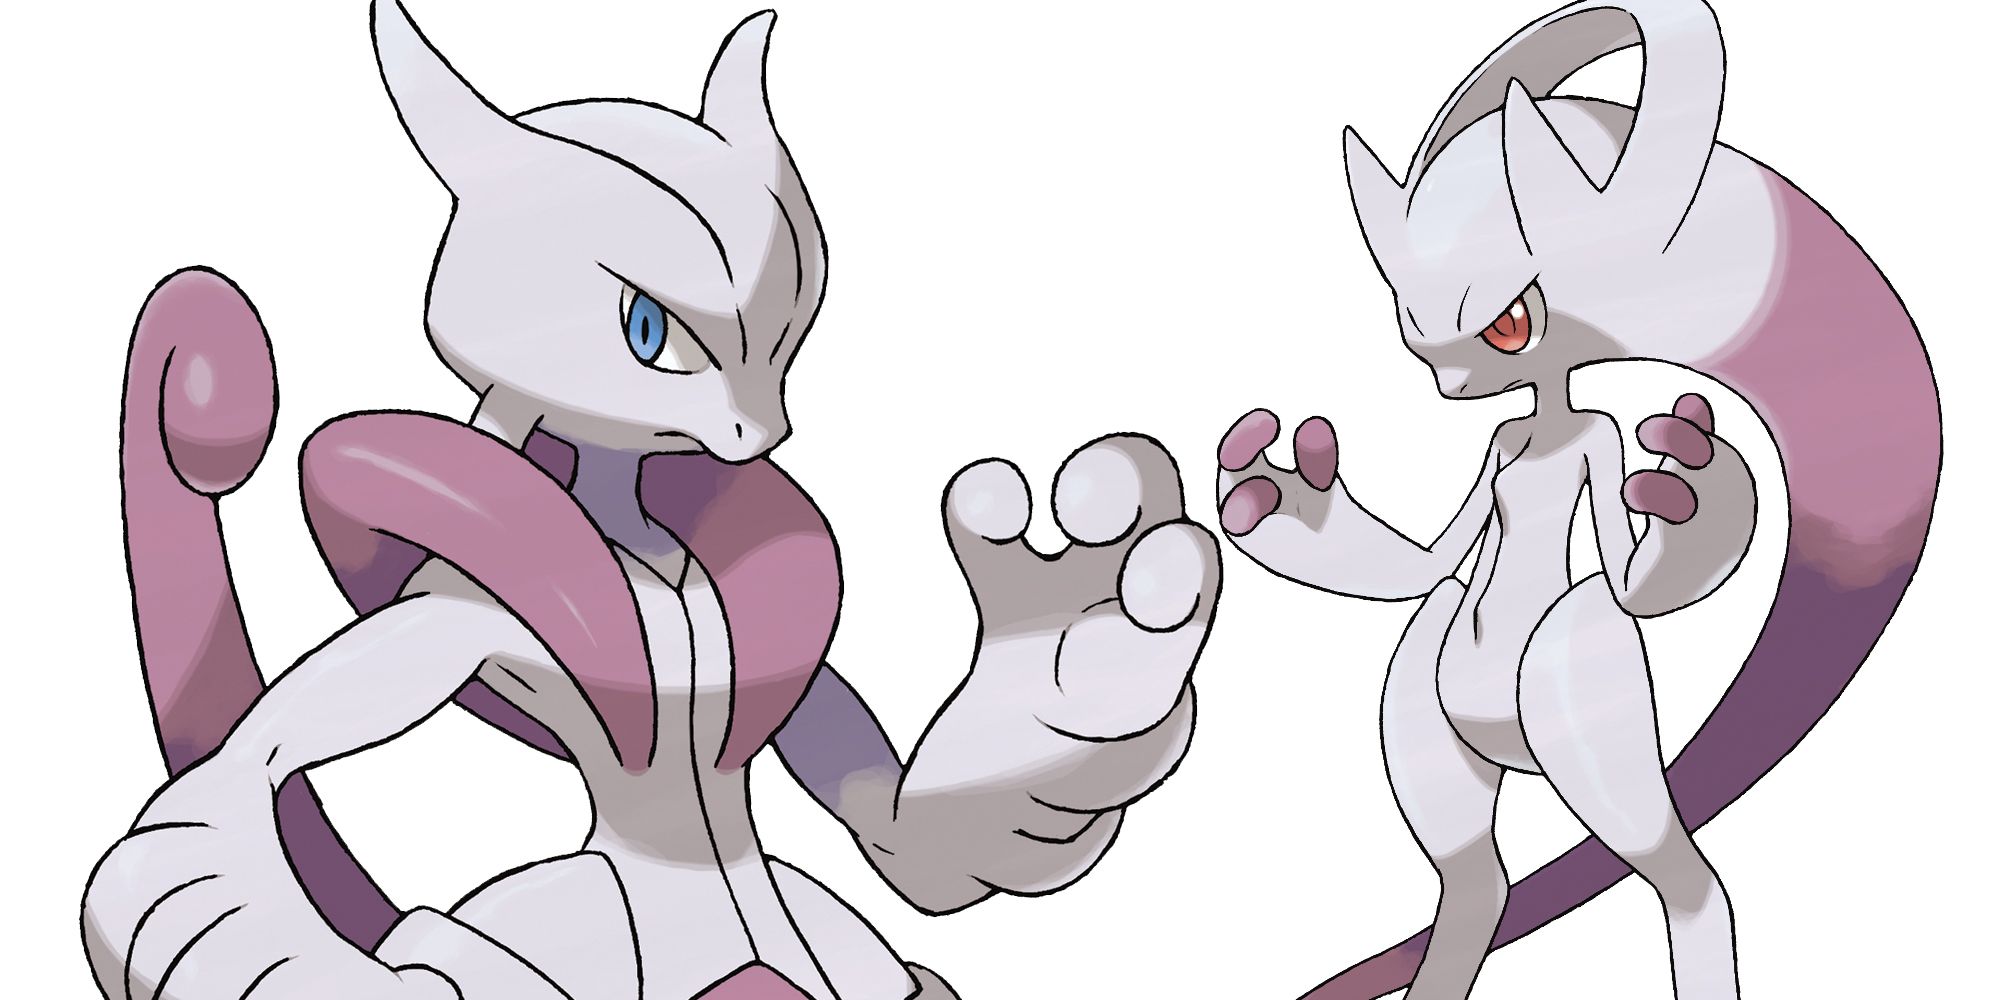 Pokémon 20 Mega Evolutions So Powerful They Should Be Banned